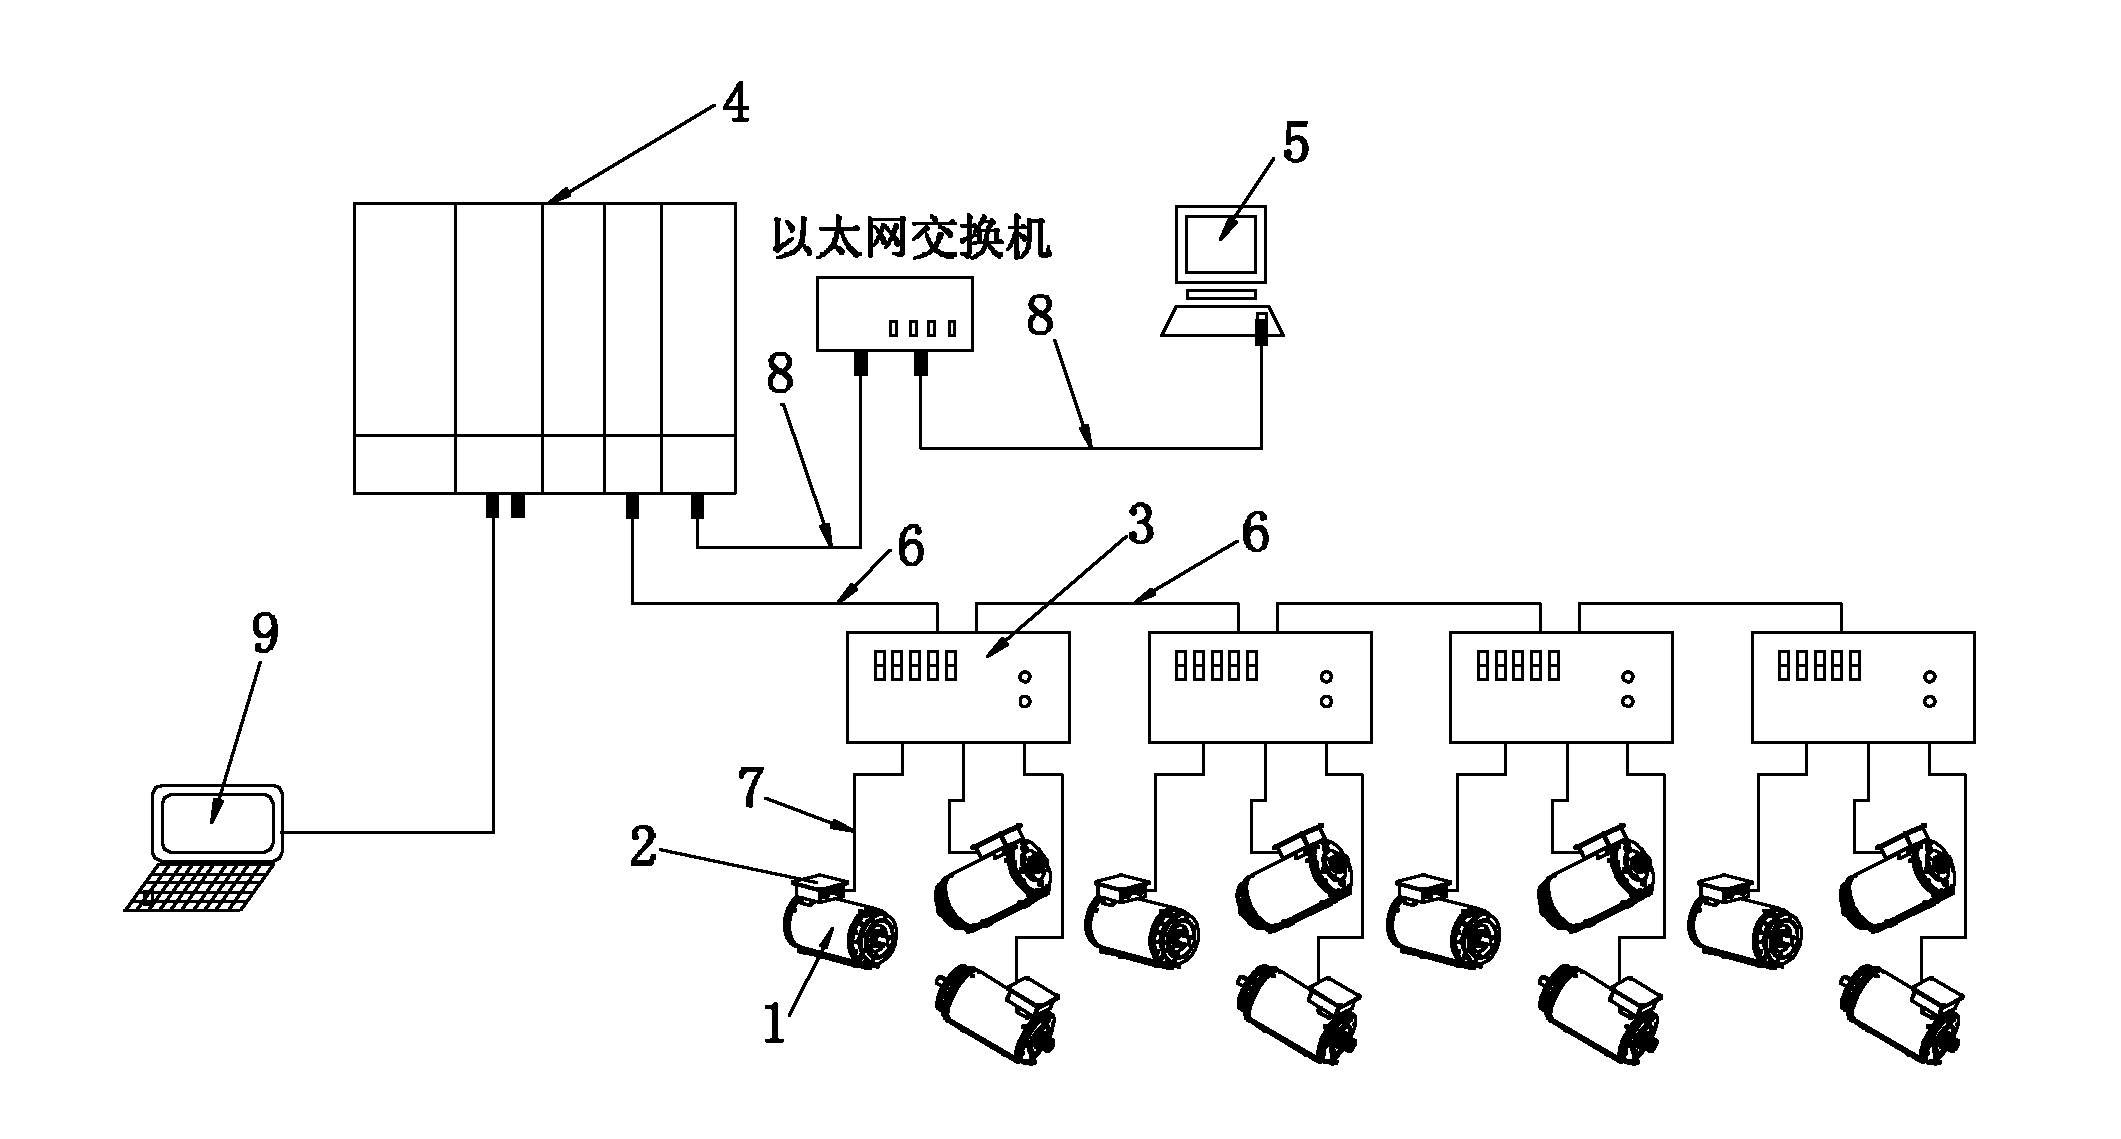 Motor monitoring system of three-roller continuous tube-rolling mill